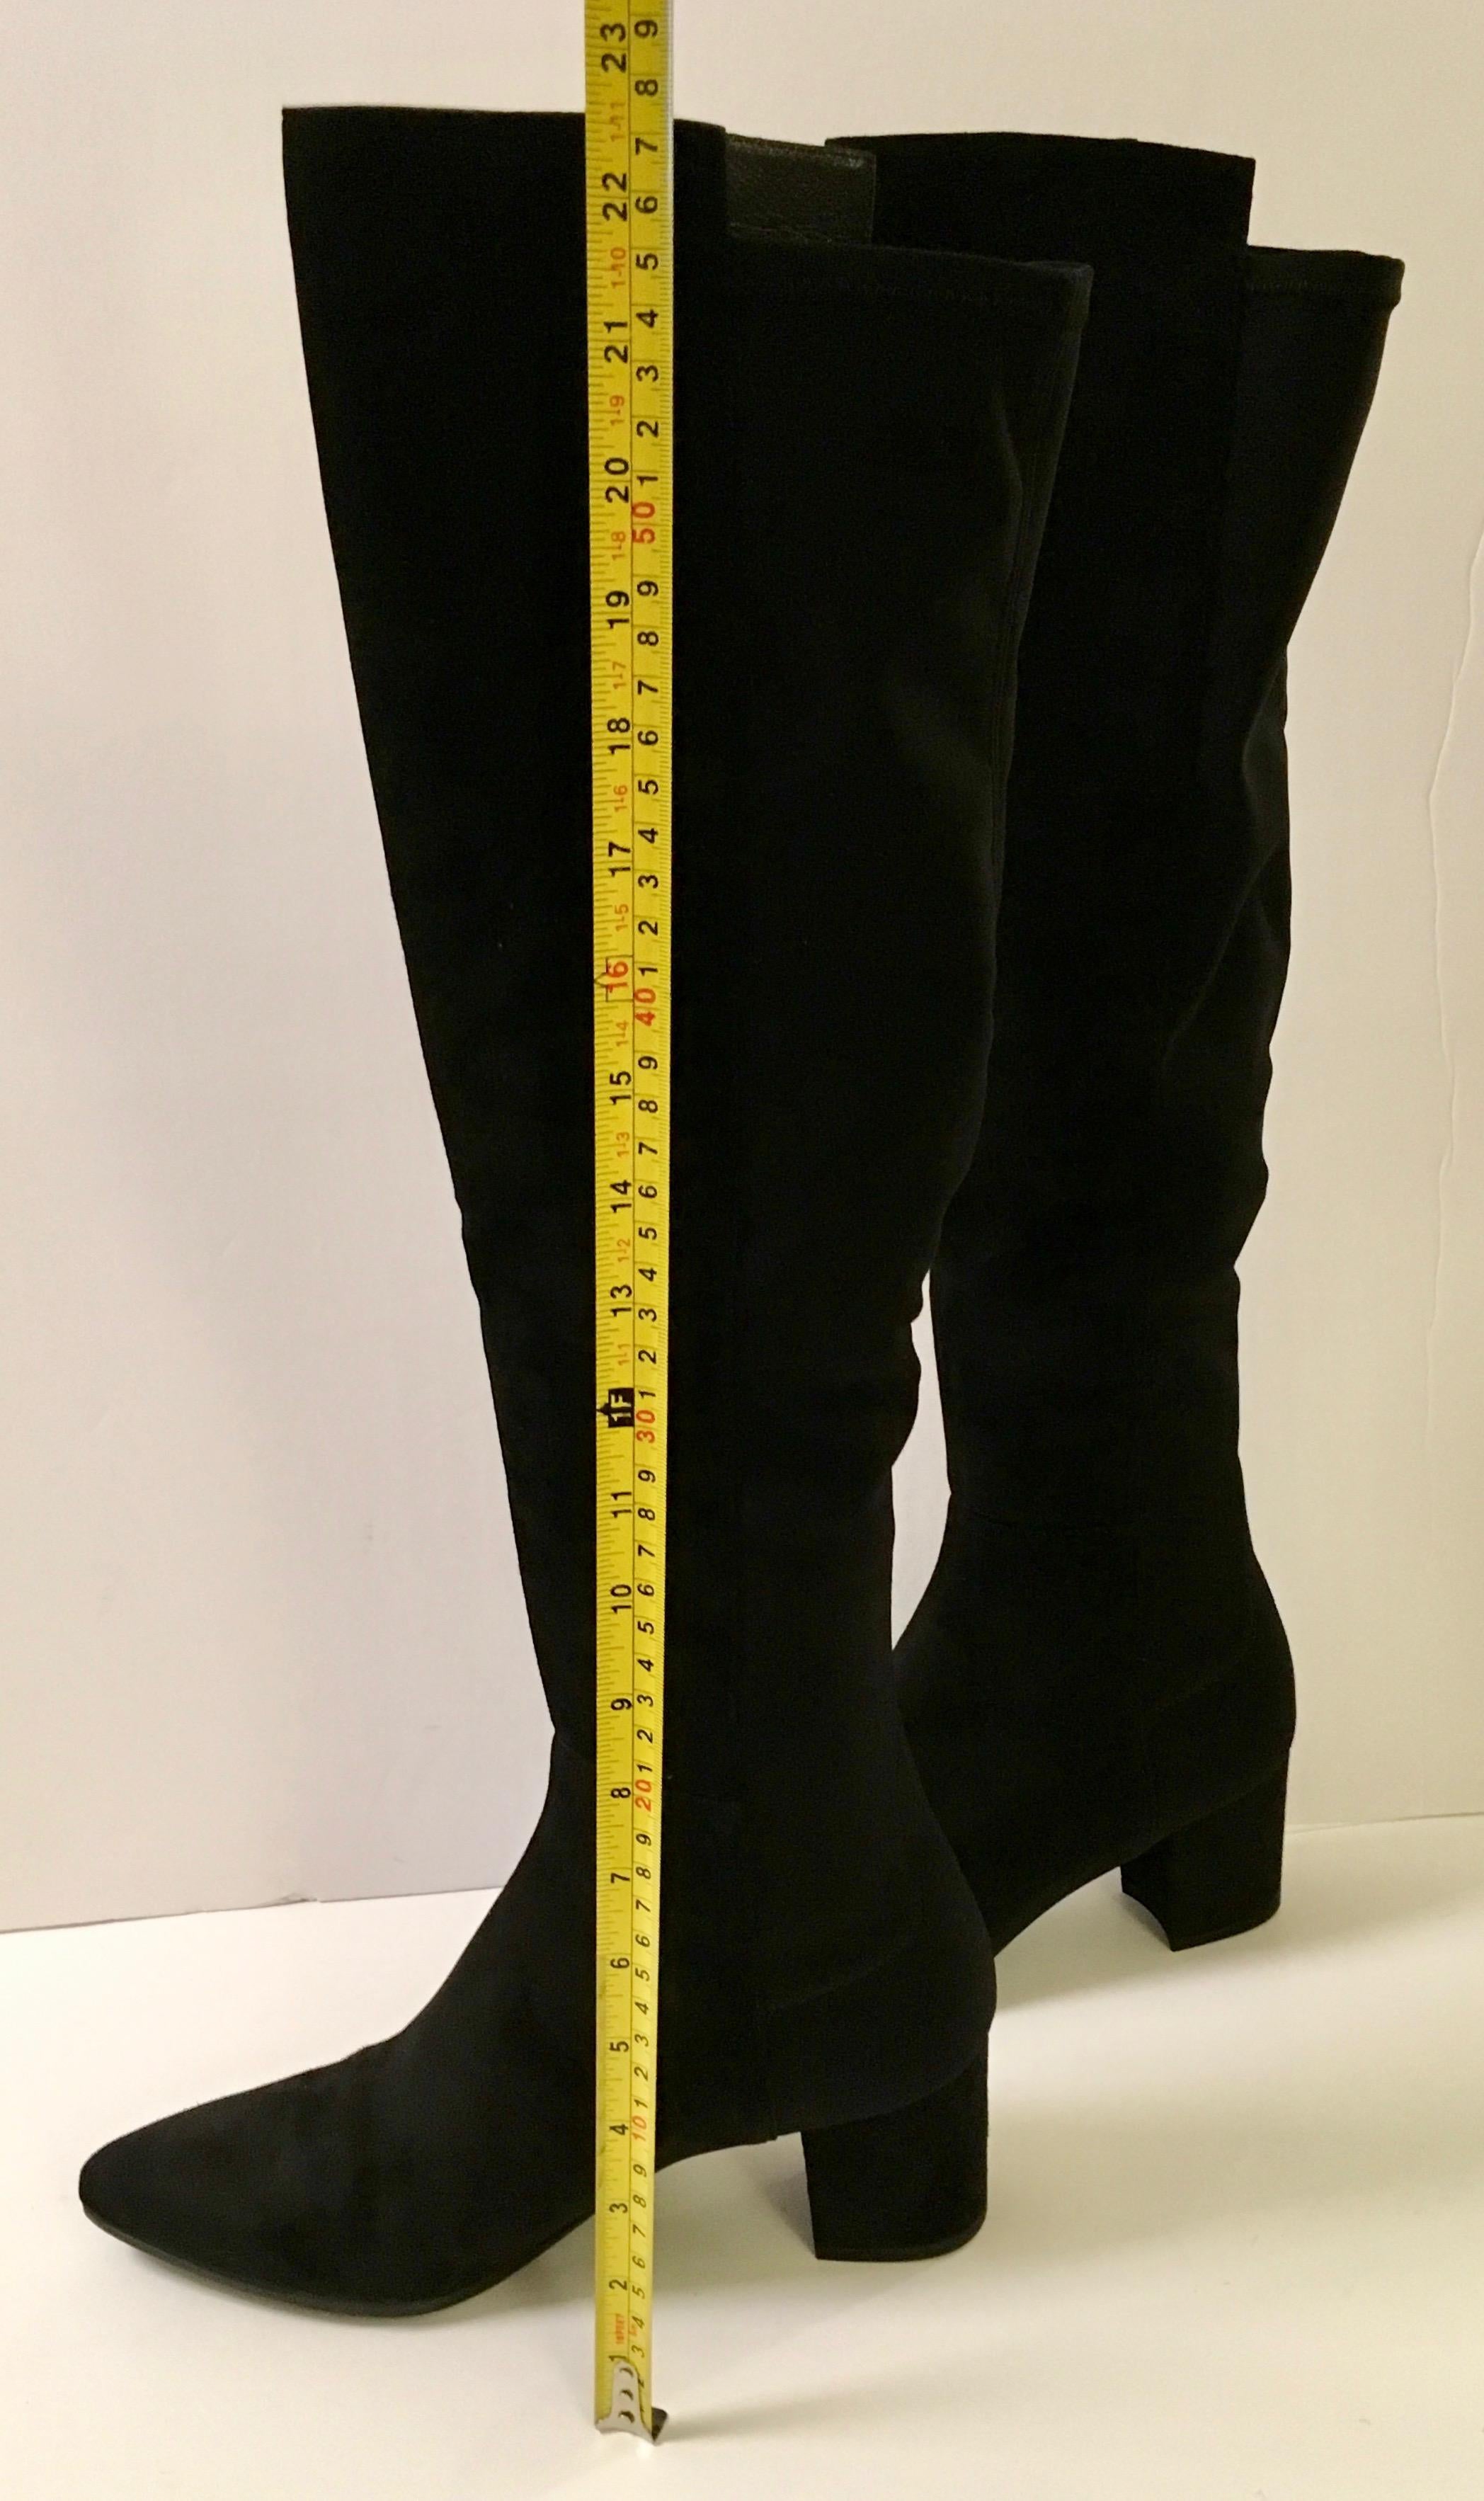 Stuart Weitzman Black Suede Over-the-knee Boots In New Condition For Sale In Boca Raton, FL